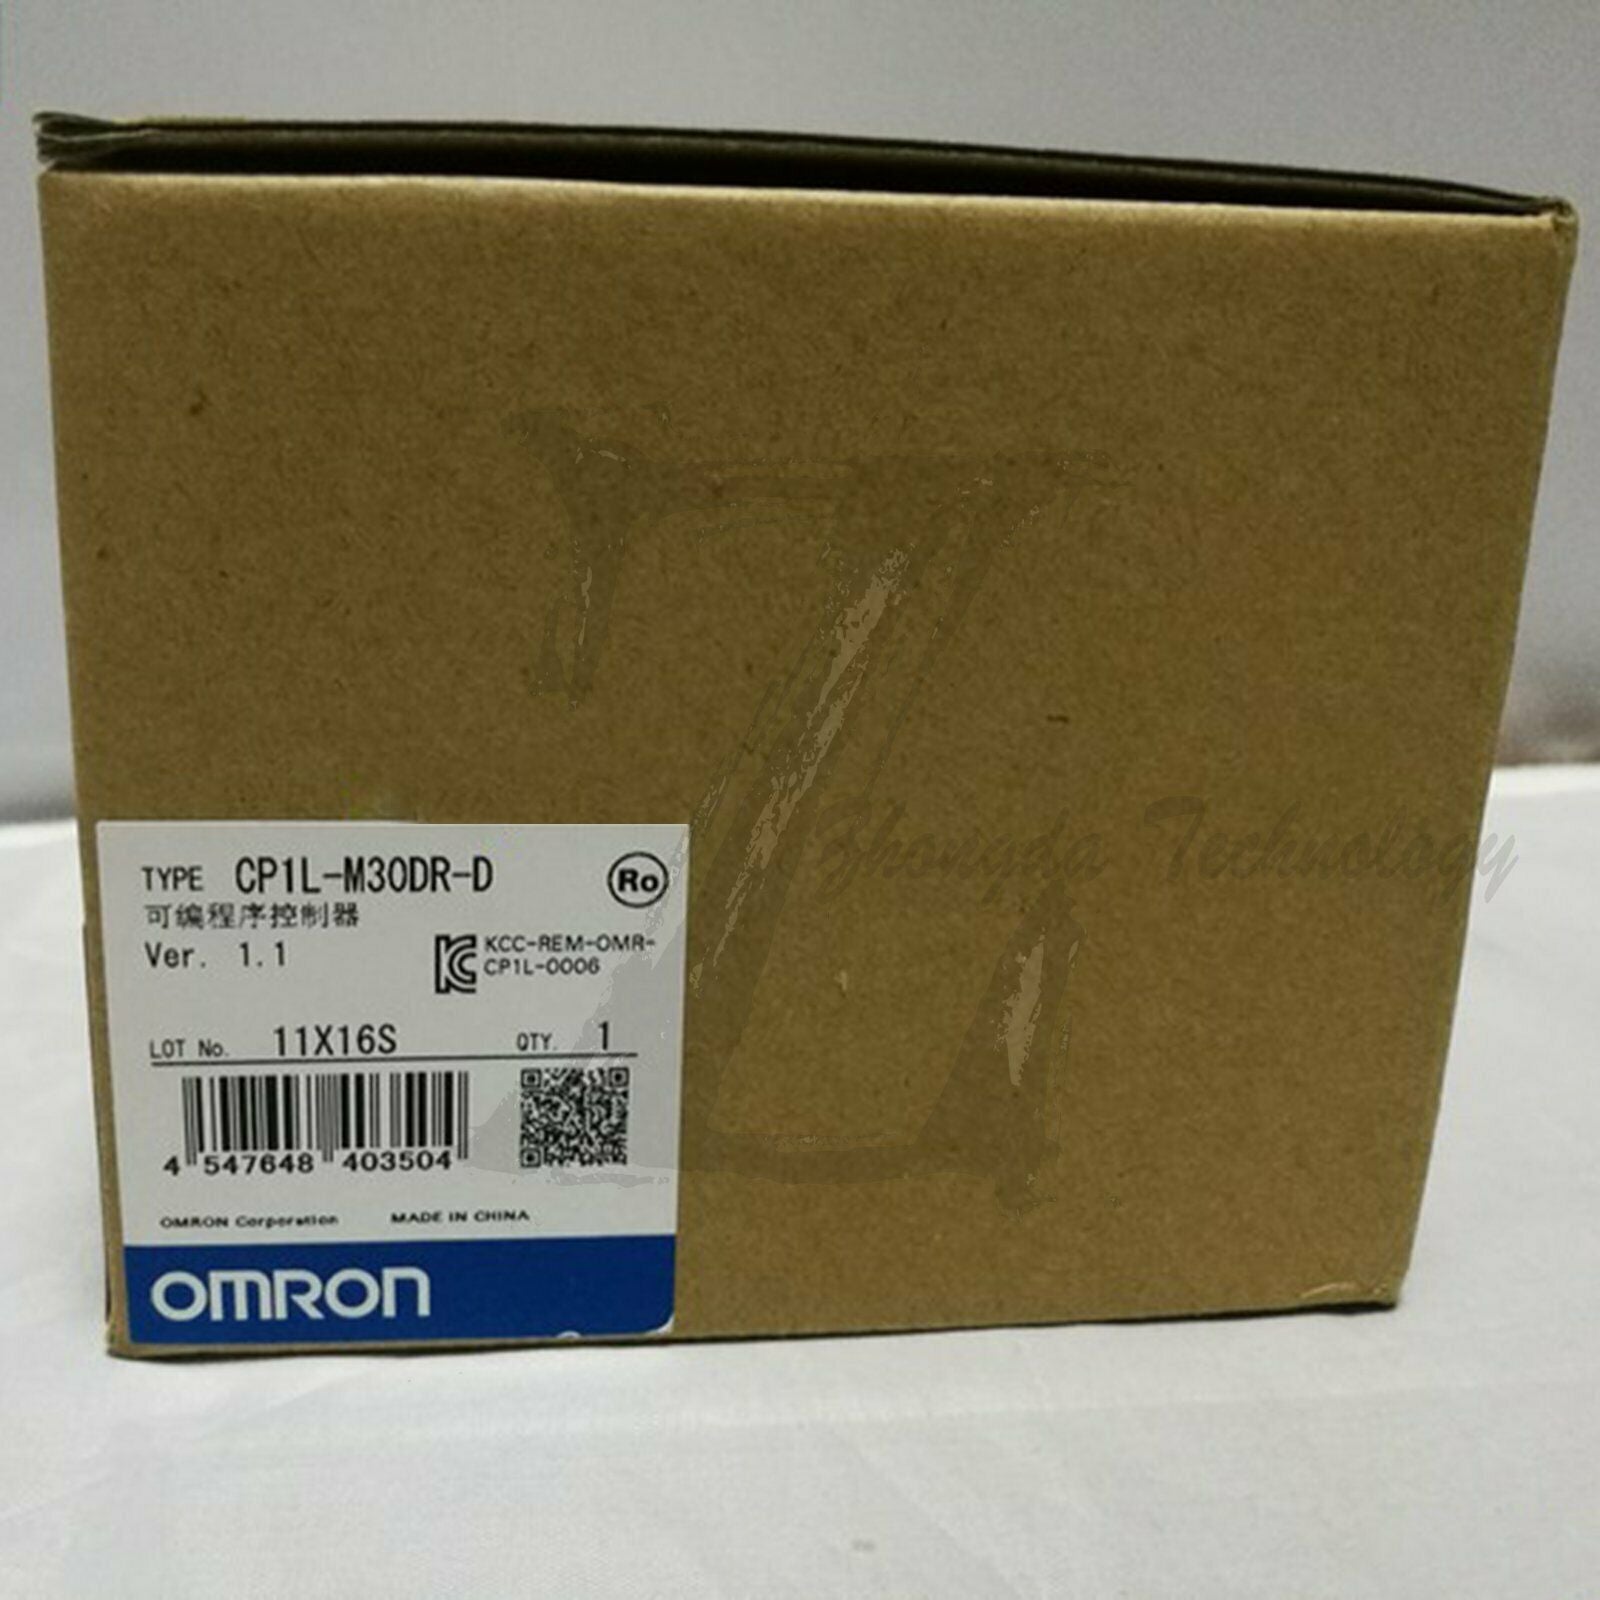 1Pc new Omron programmable controller CP1L-M30DR-D one year warranty KOEED 201-500, 80%, import_2020_10_10_031751, Omron, Other